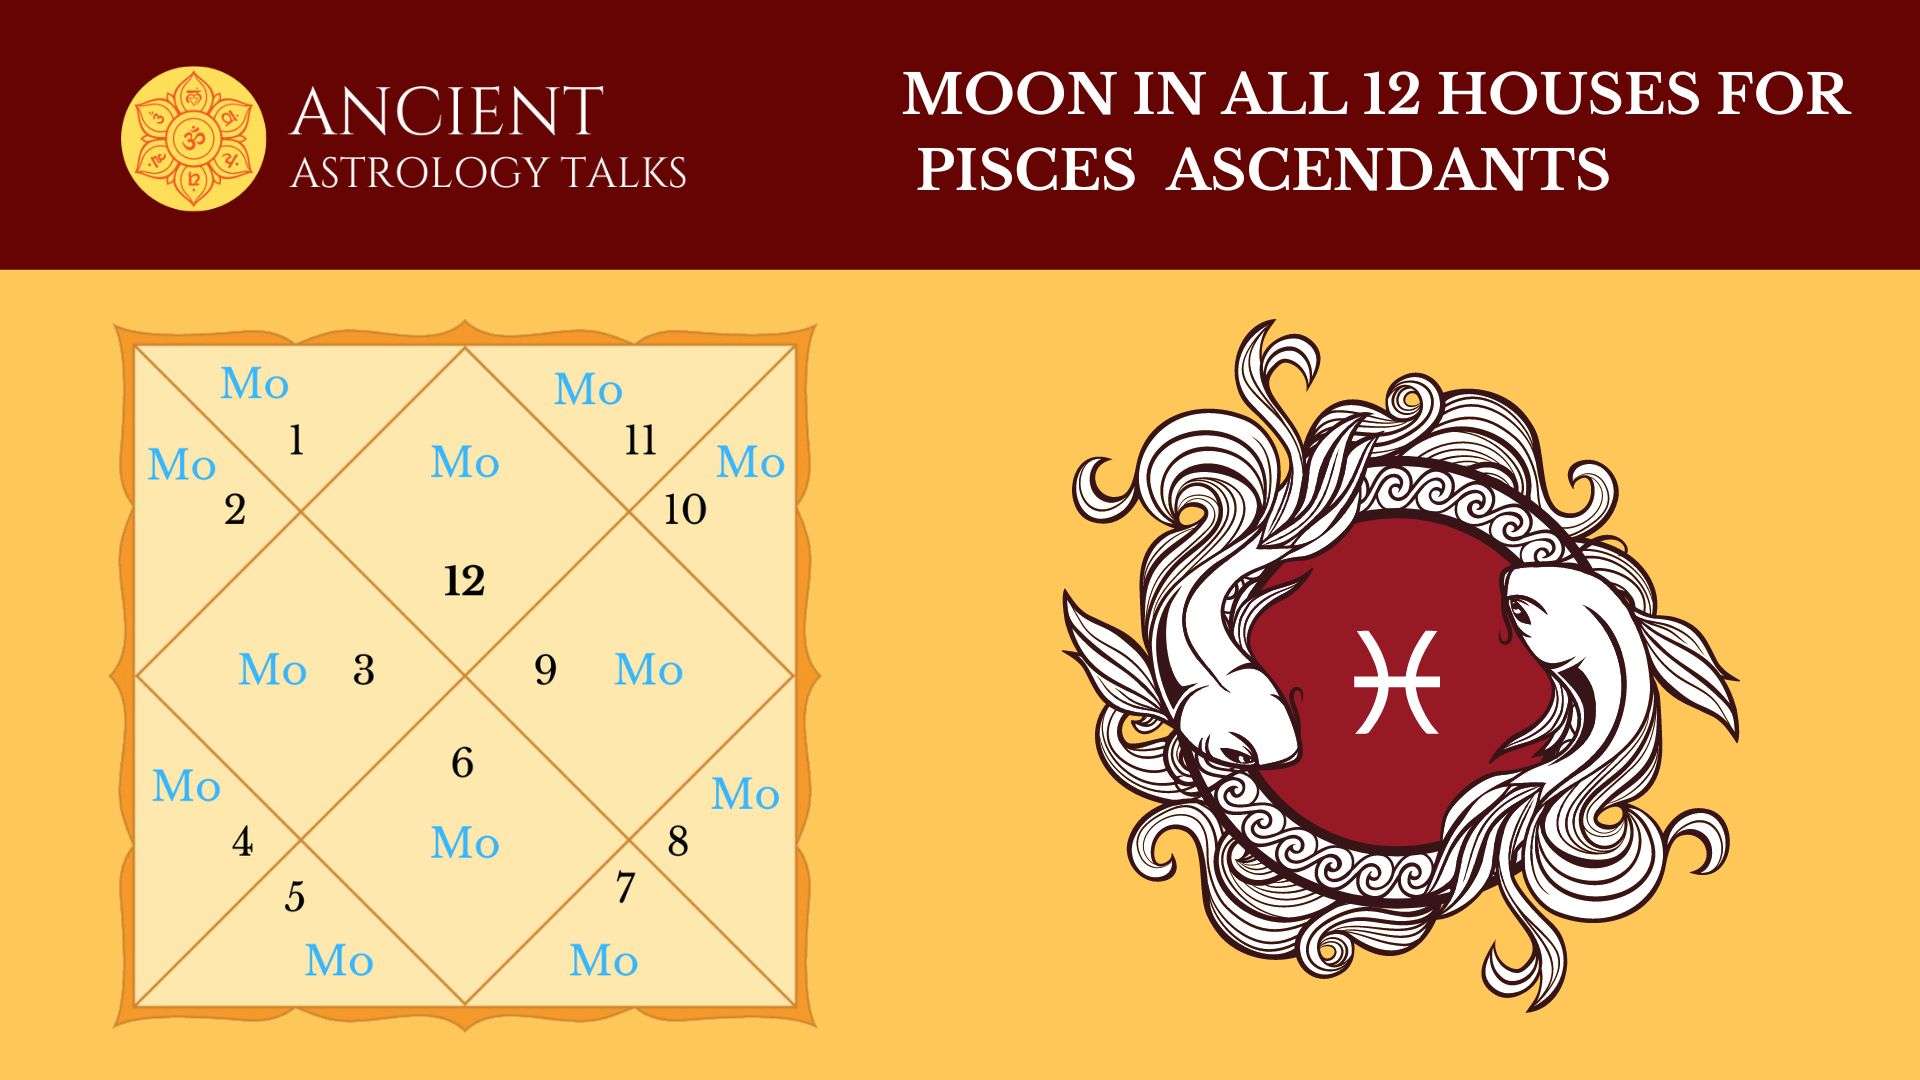 MOON IN ALL 12 HOUSES FOR Pisces ASCENDANTS